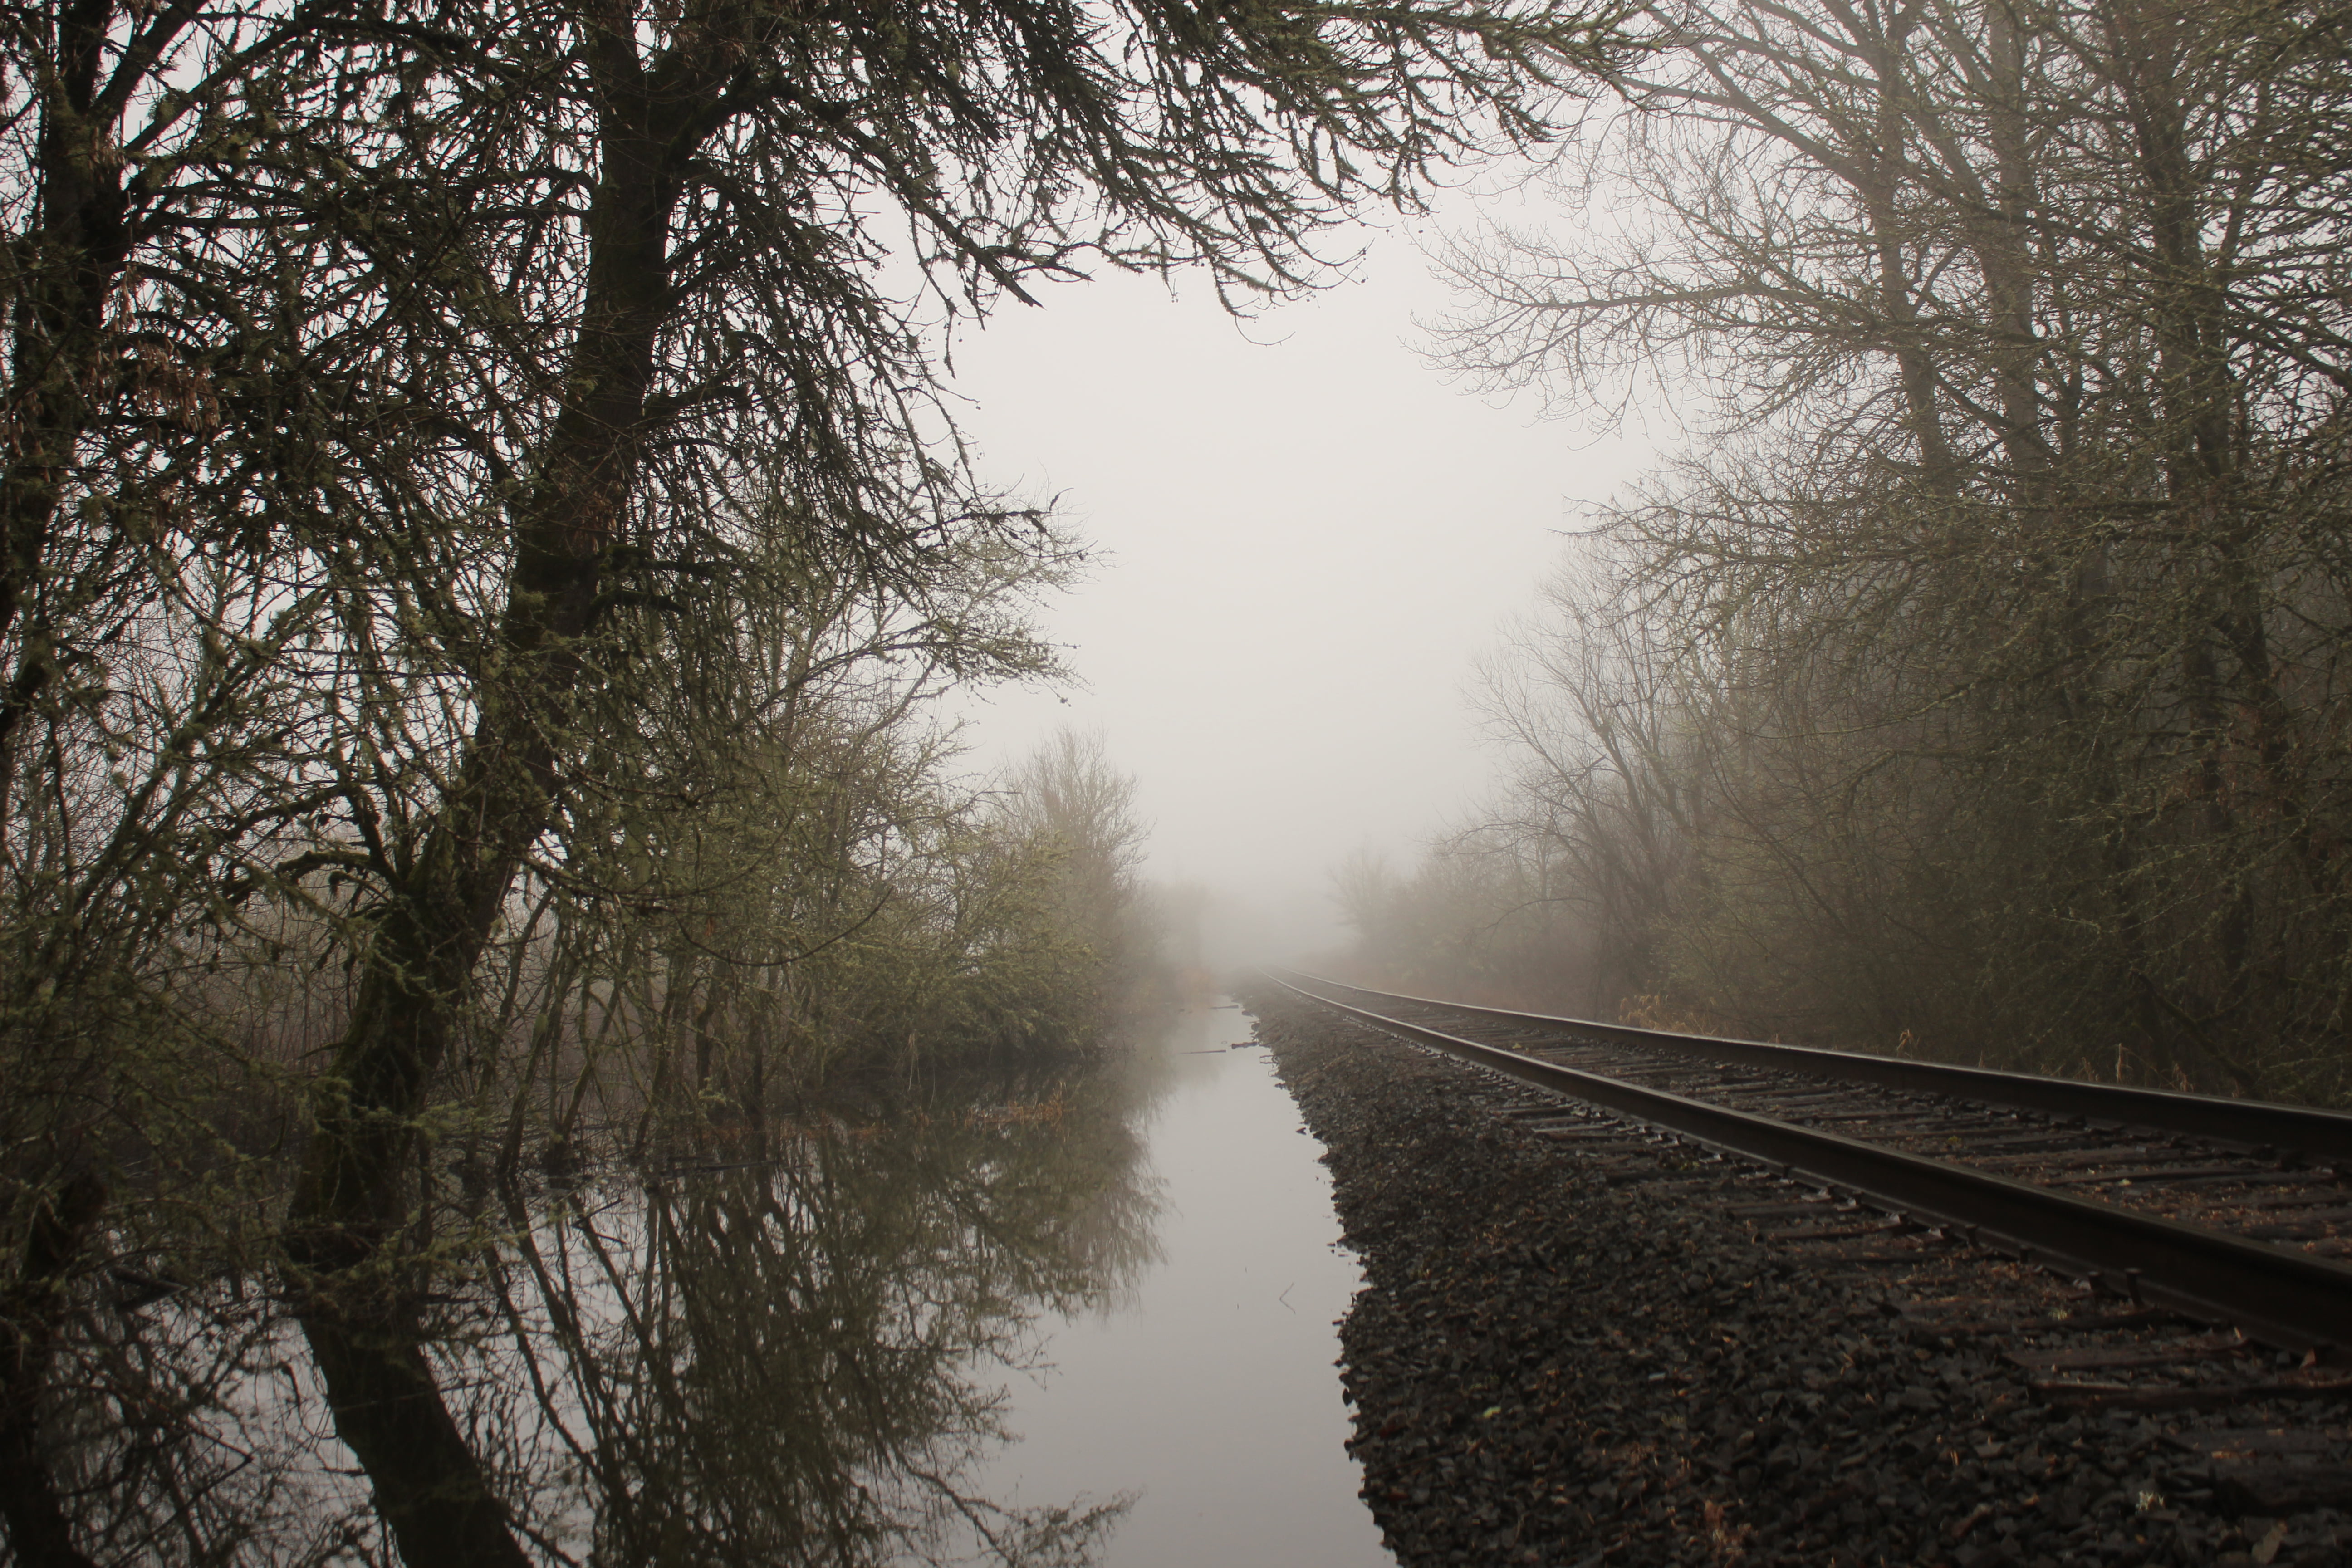 green leafed trees, railroad track, mist, water, reflection